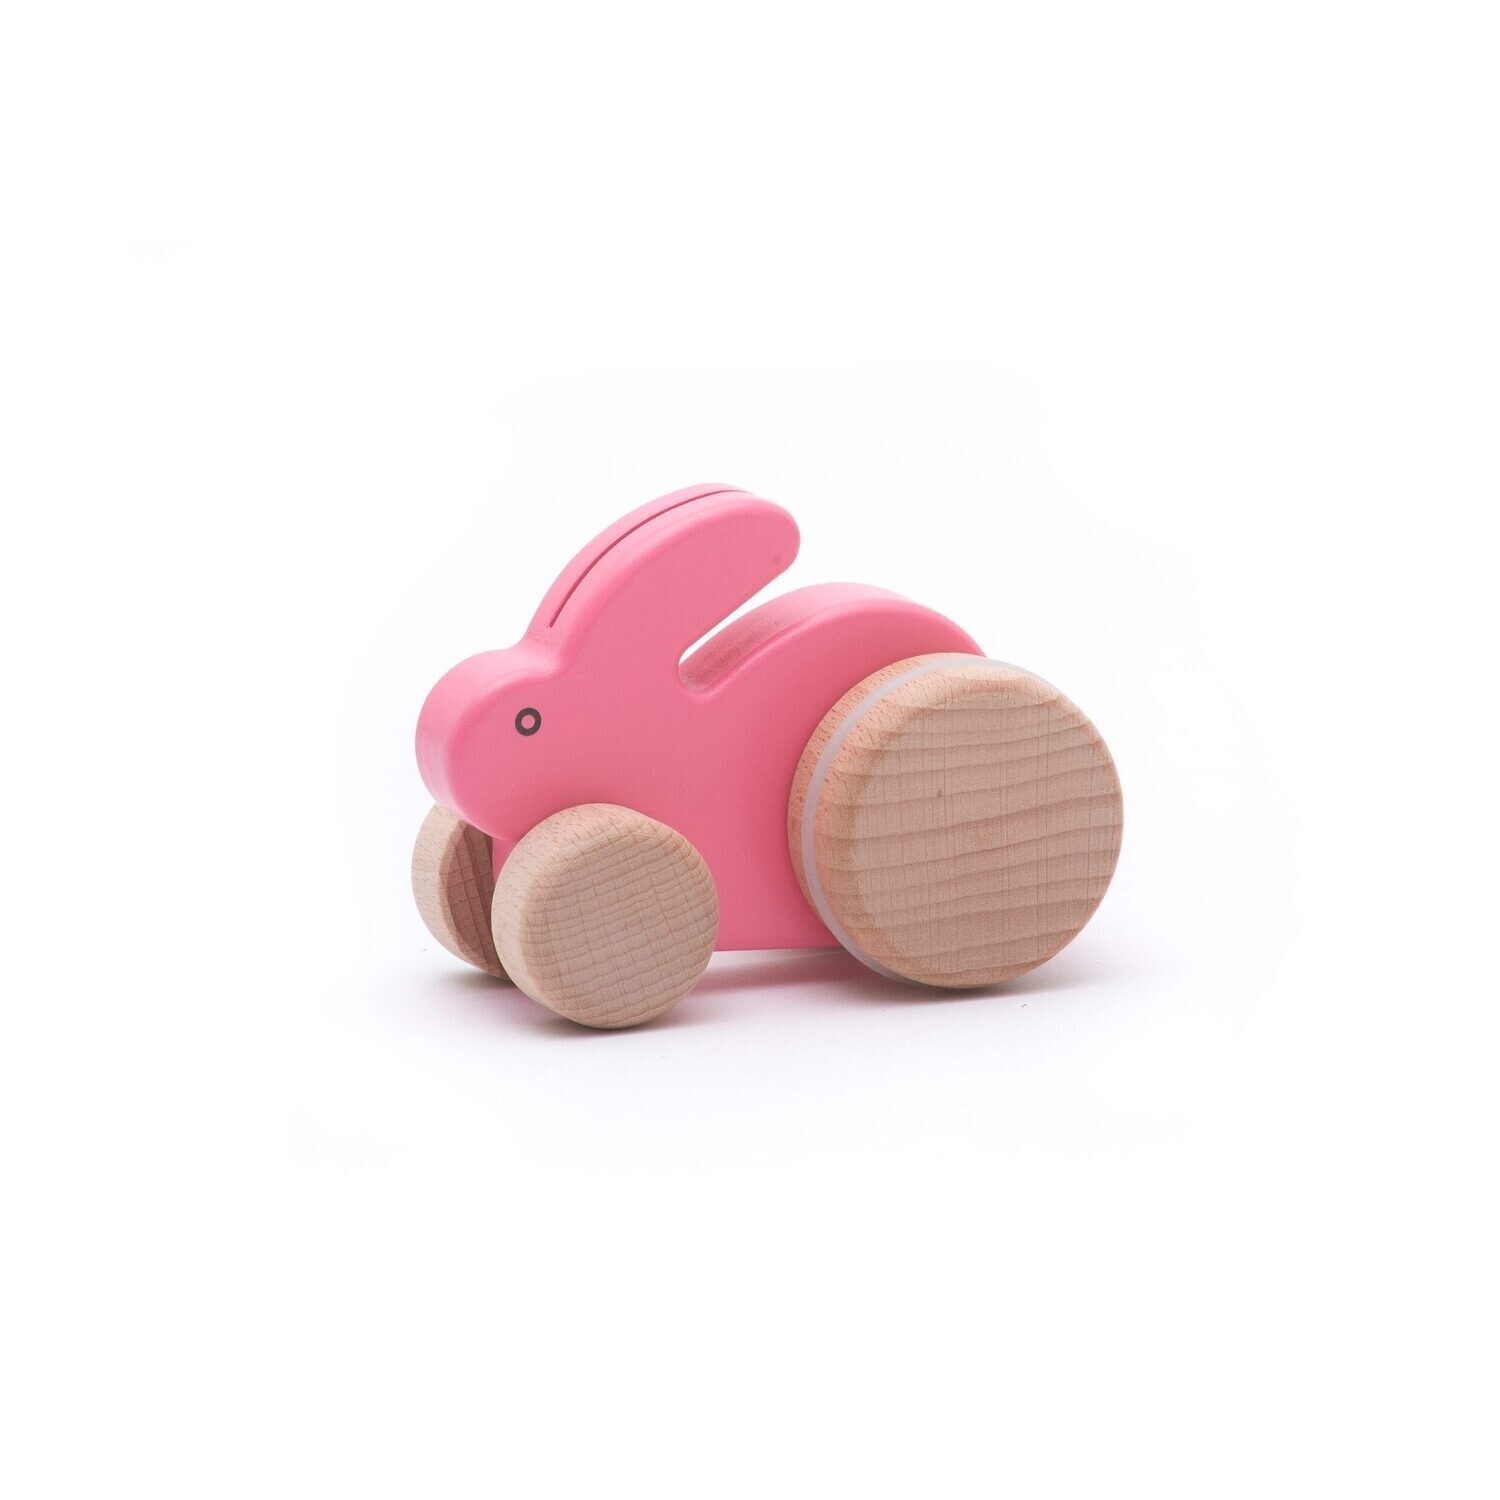 Small Rabbit Wooden Toy - Pink